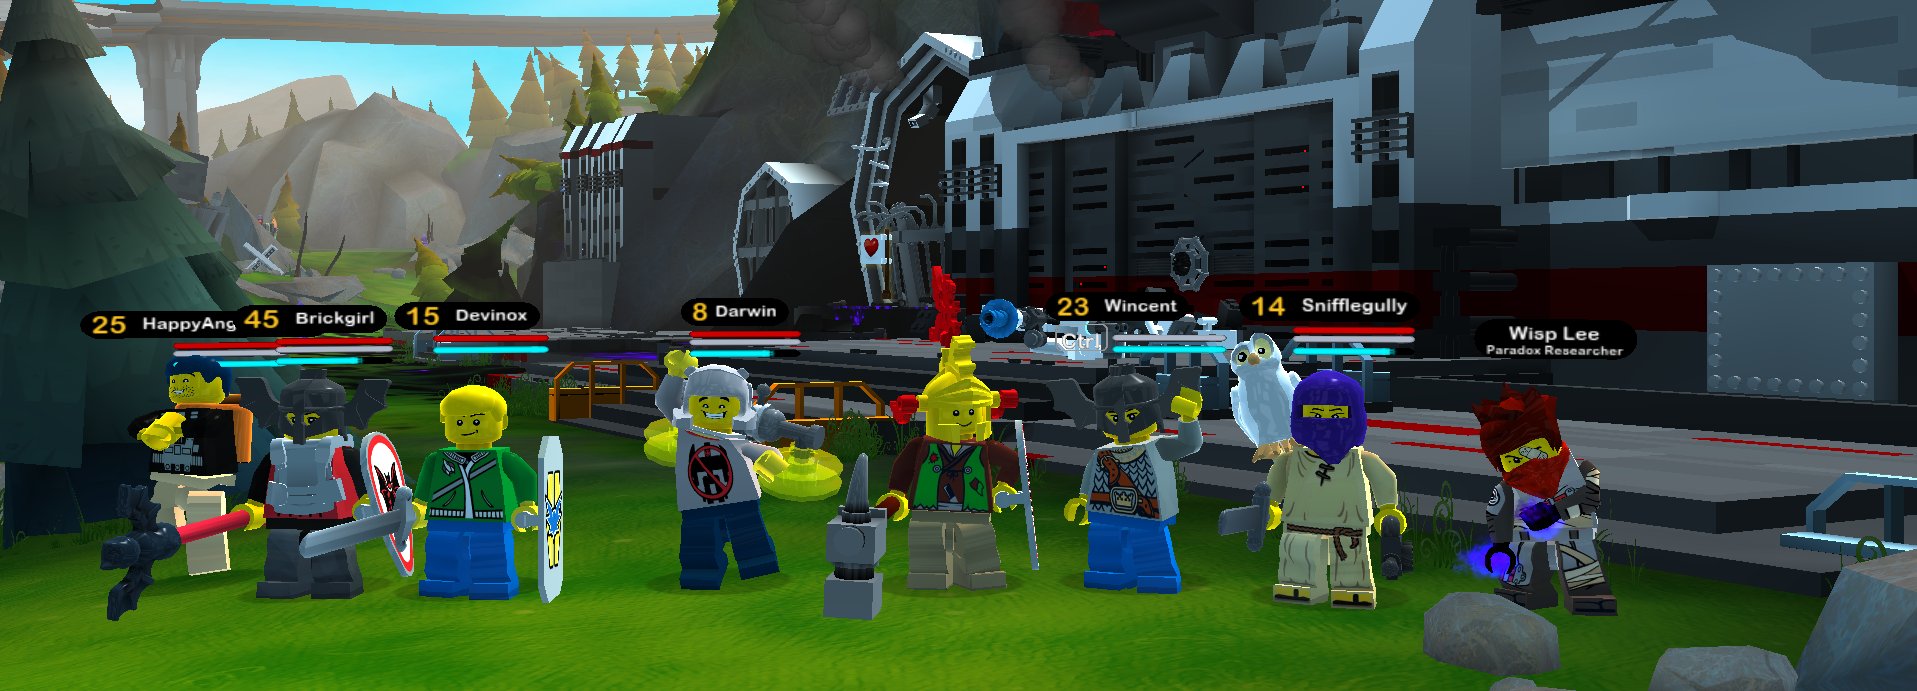 Darkflame Universe on Twitter: "To think, back in 2016 we were celebrating 100 followers... Now we've got 6,000! Thank you, LEGO Universe community! Alpha 2 has been a huge step for